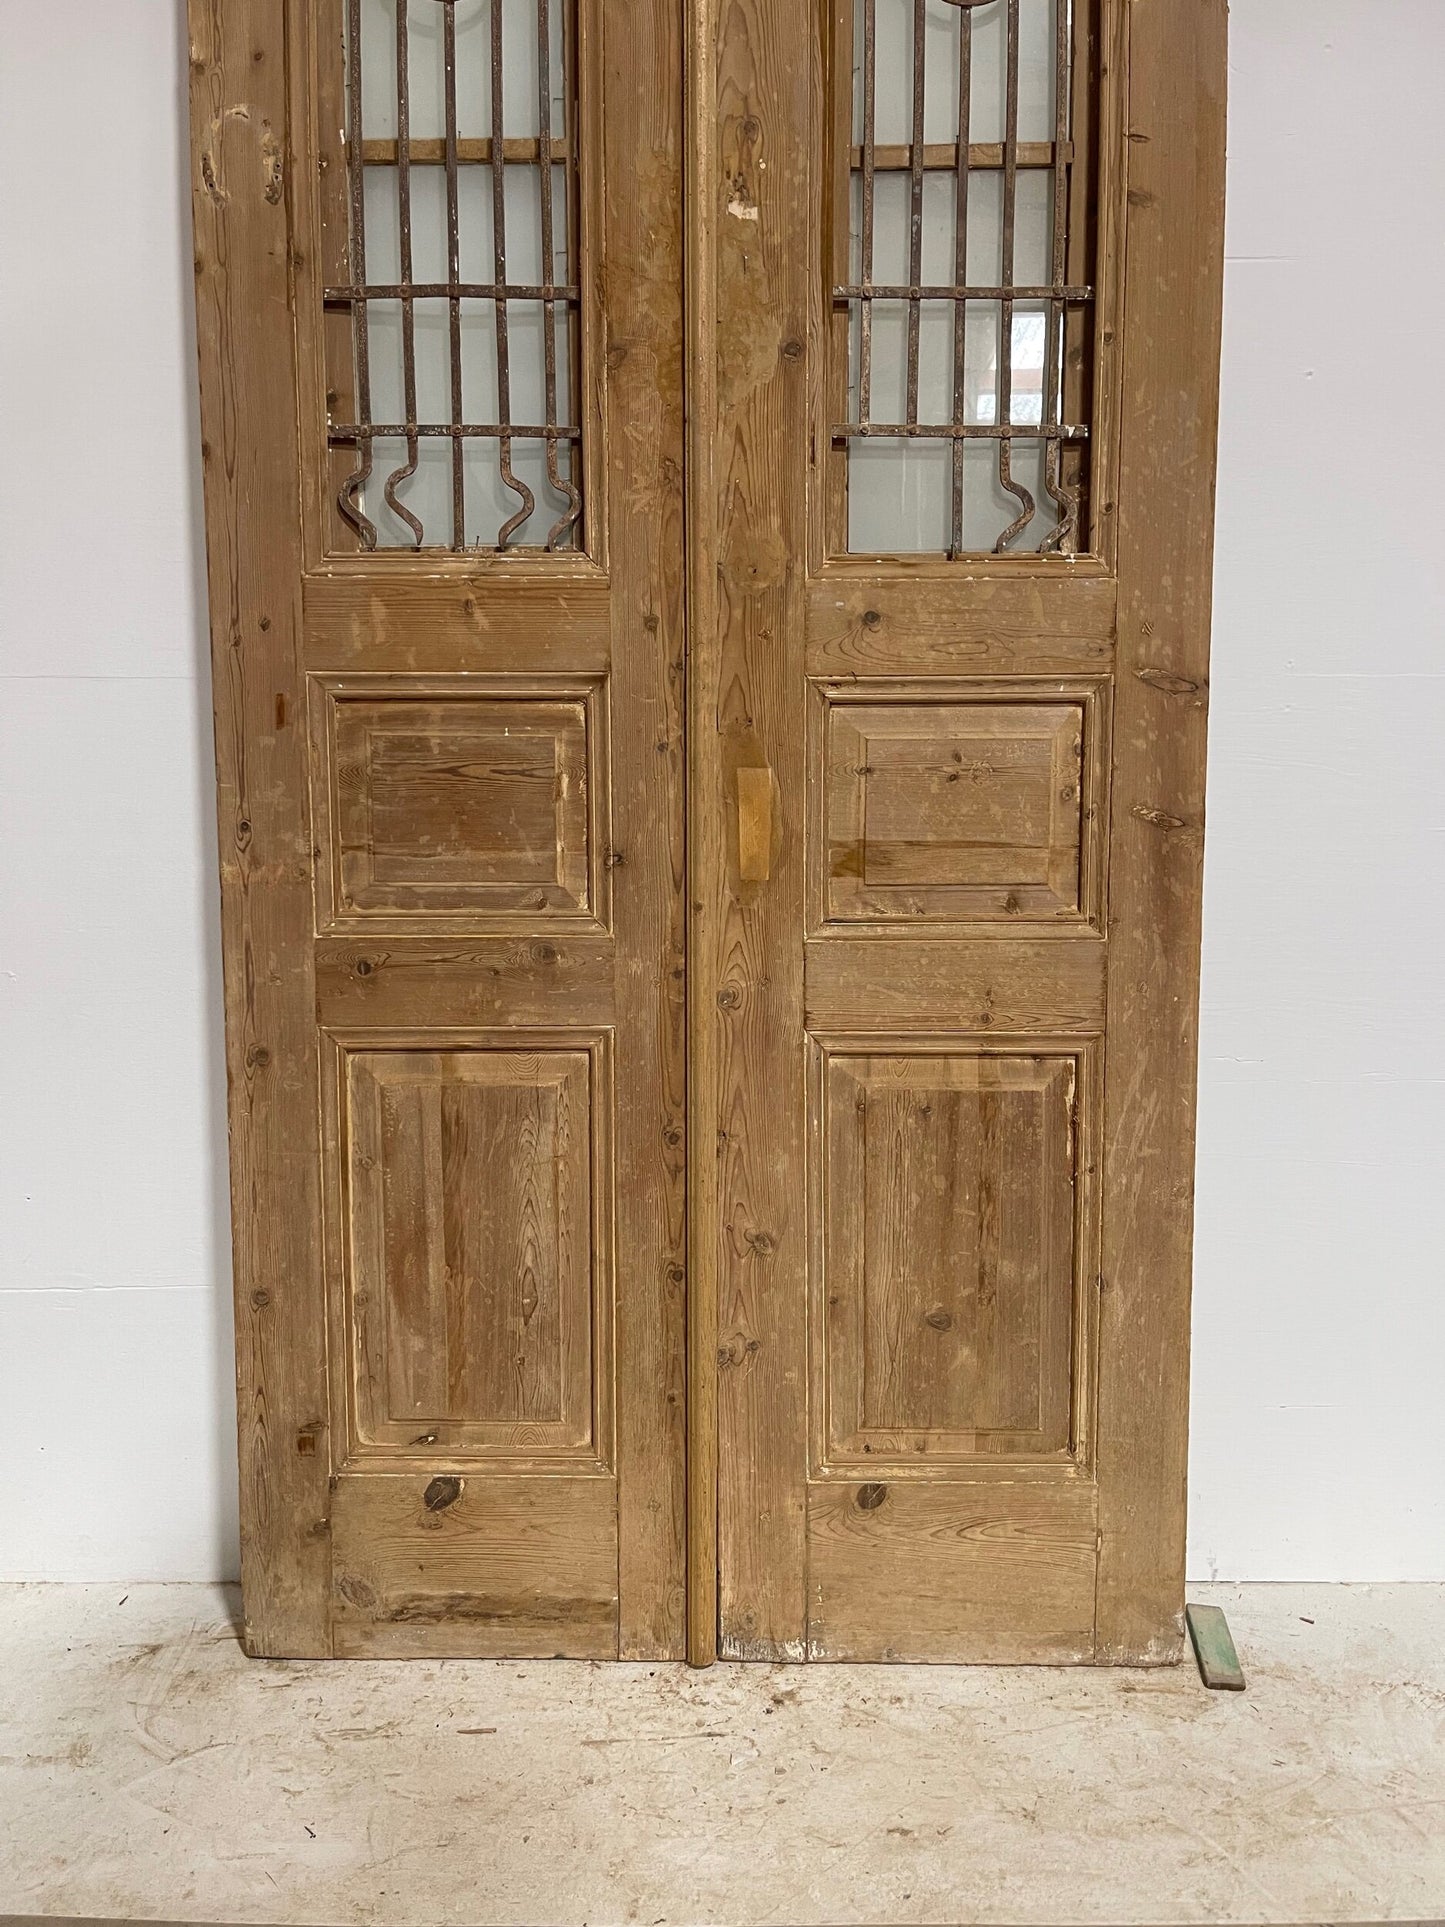 Antique french door with iron (96x46) G1284s